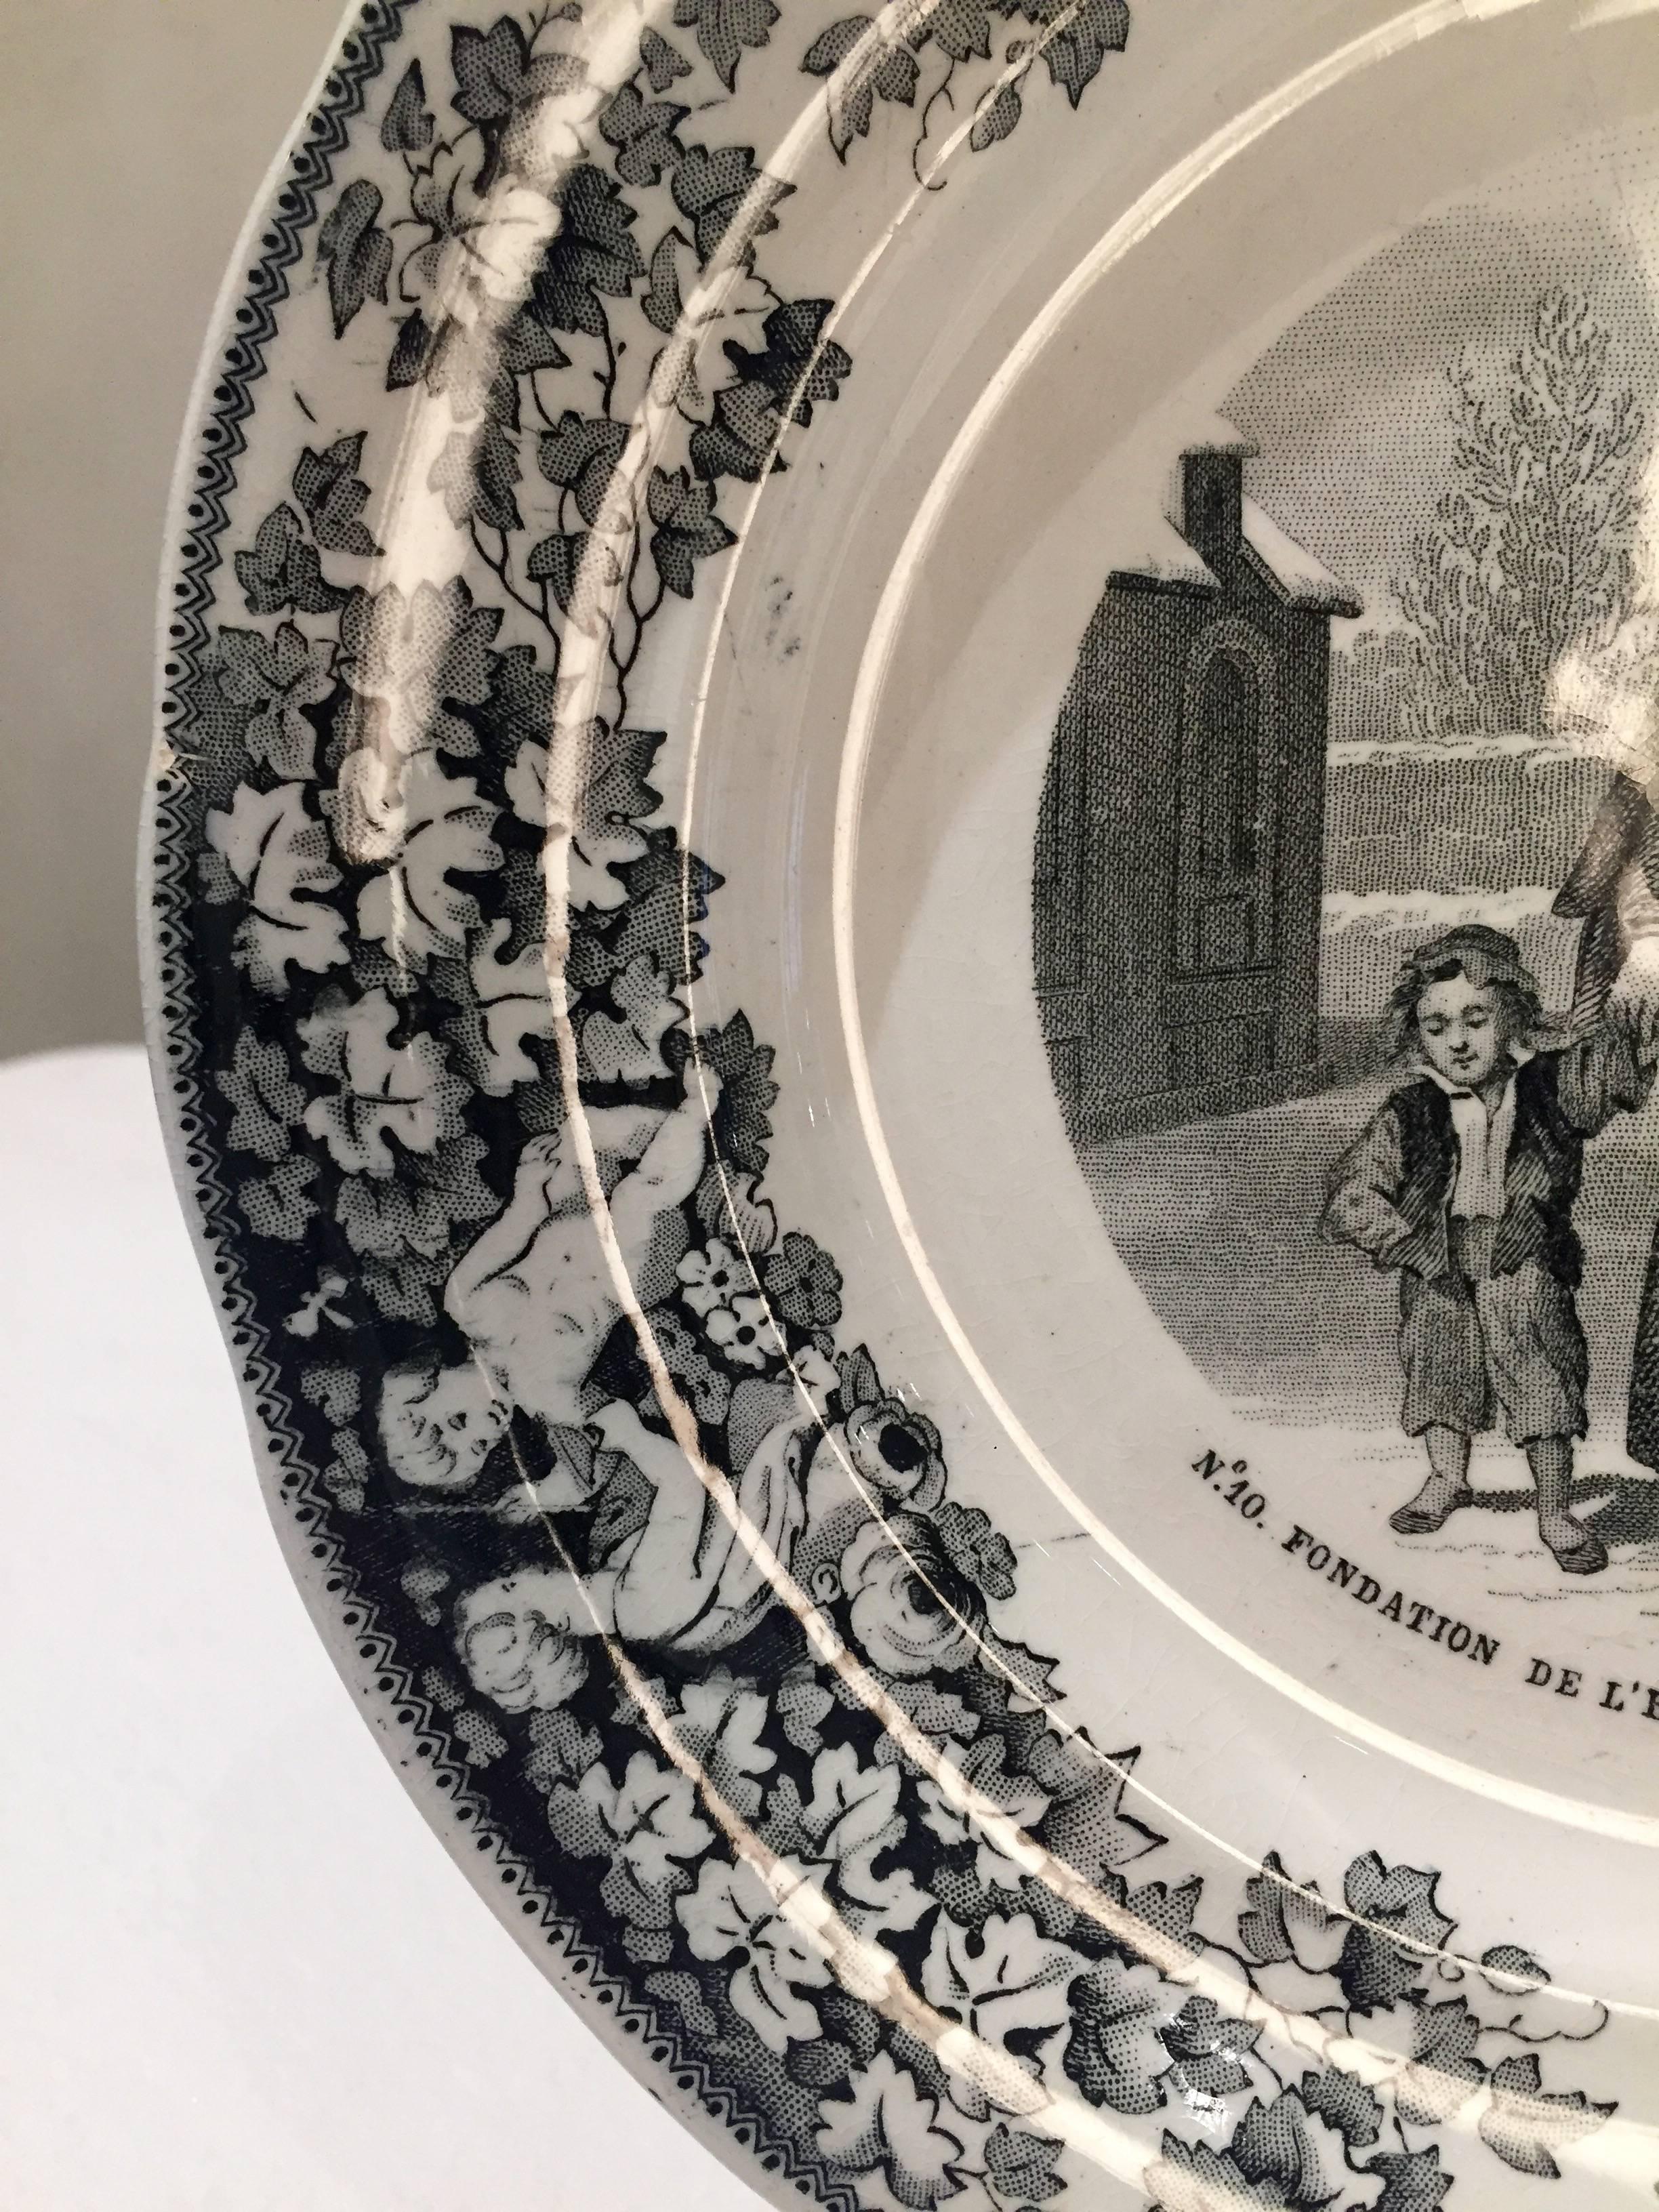 These two Faience shelf plates depict a country parish priest attending
to a wounded soldier and on plate two, rescuing two children. The plates were
issued in 1867 by the french firm Creil & Montereau using the trademark 
L.M.& Cie ( Lebeuf et